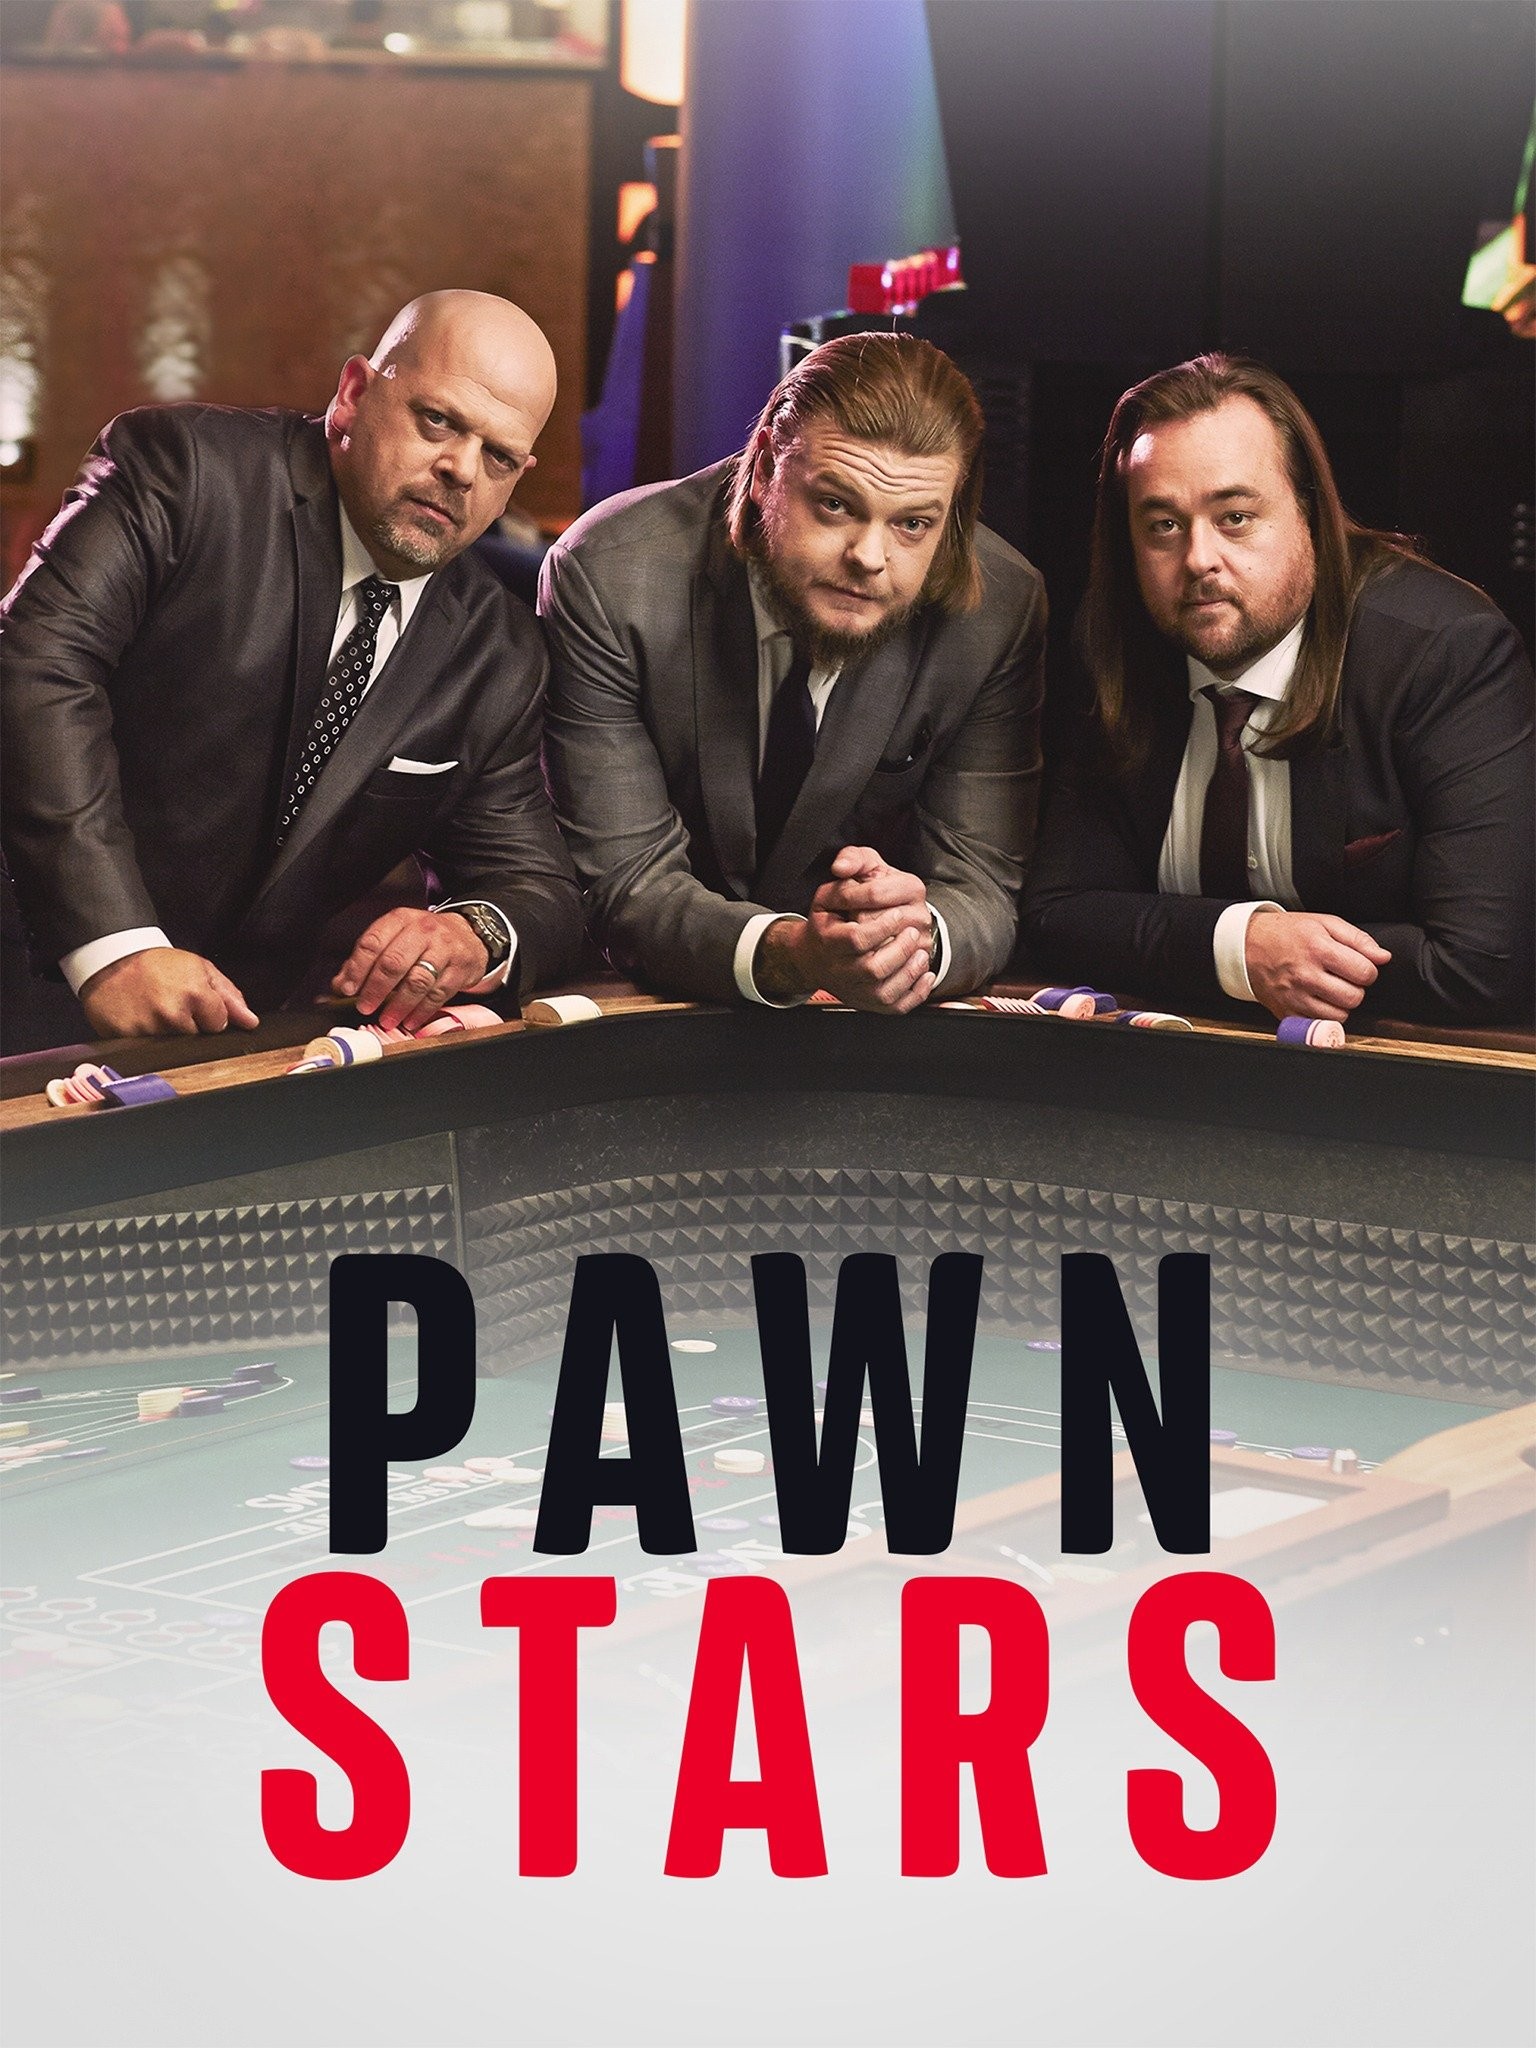 Pawn Stars' game show coming to History